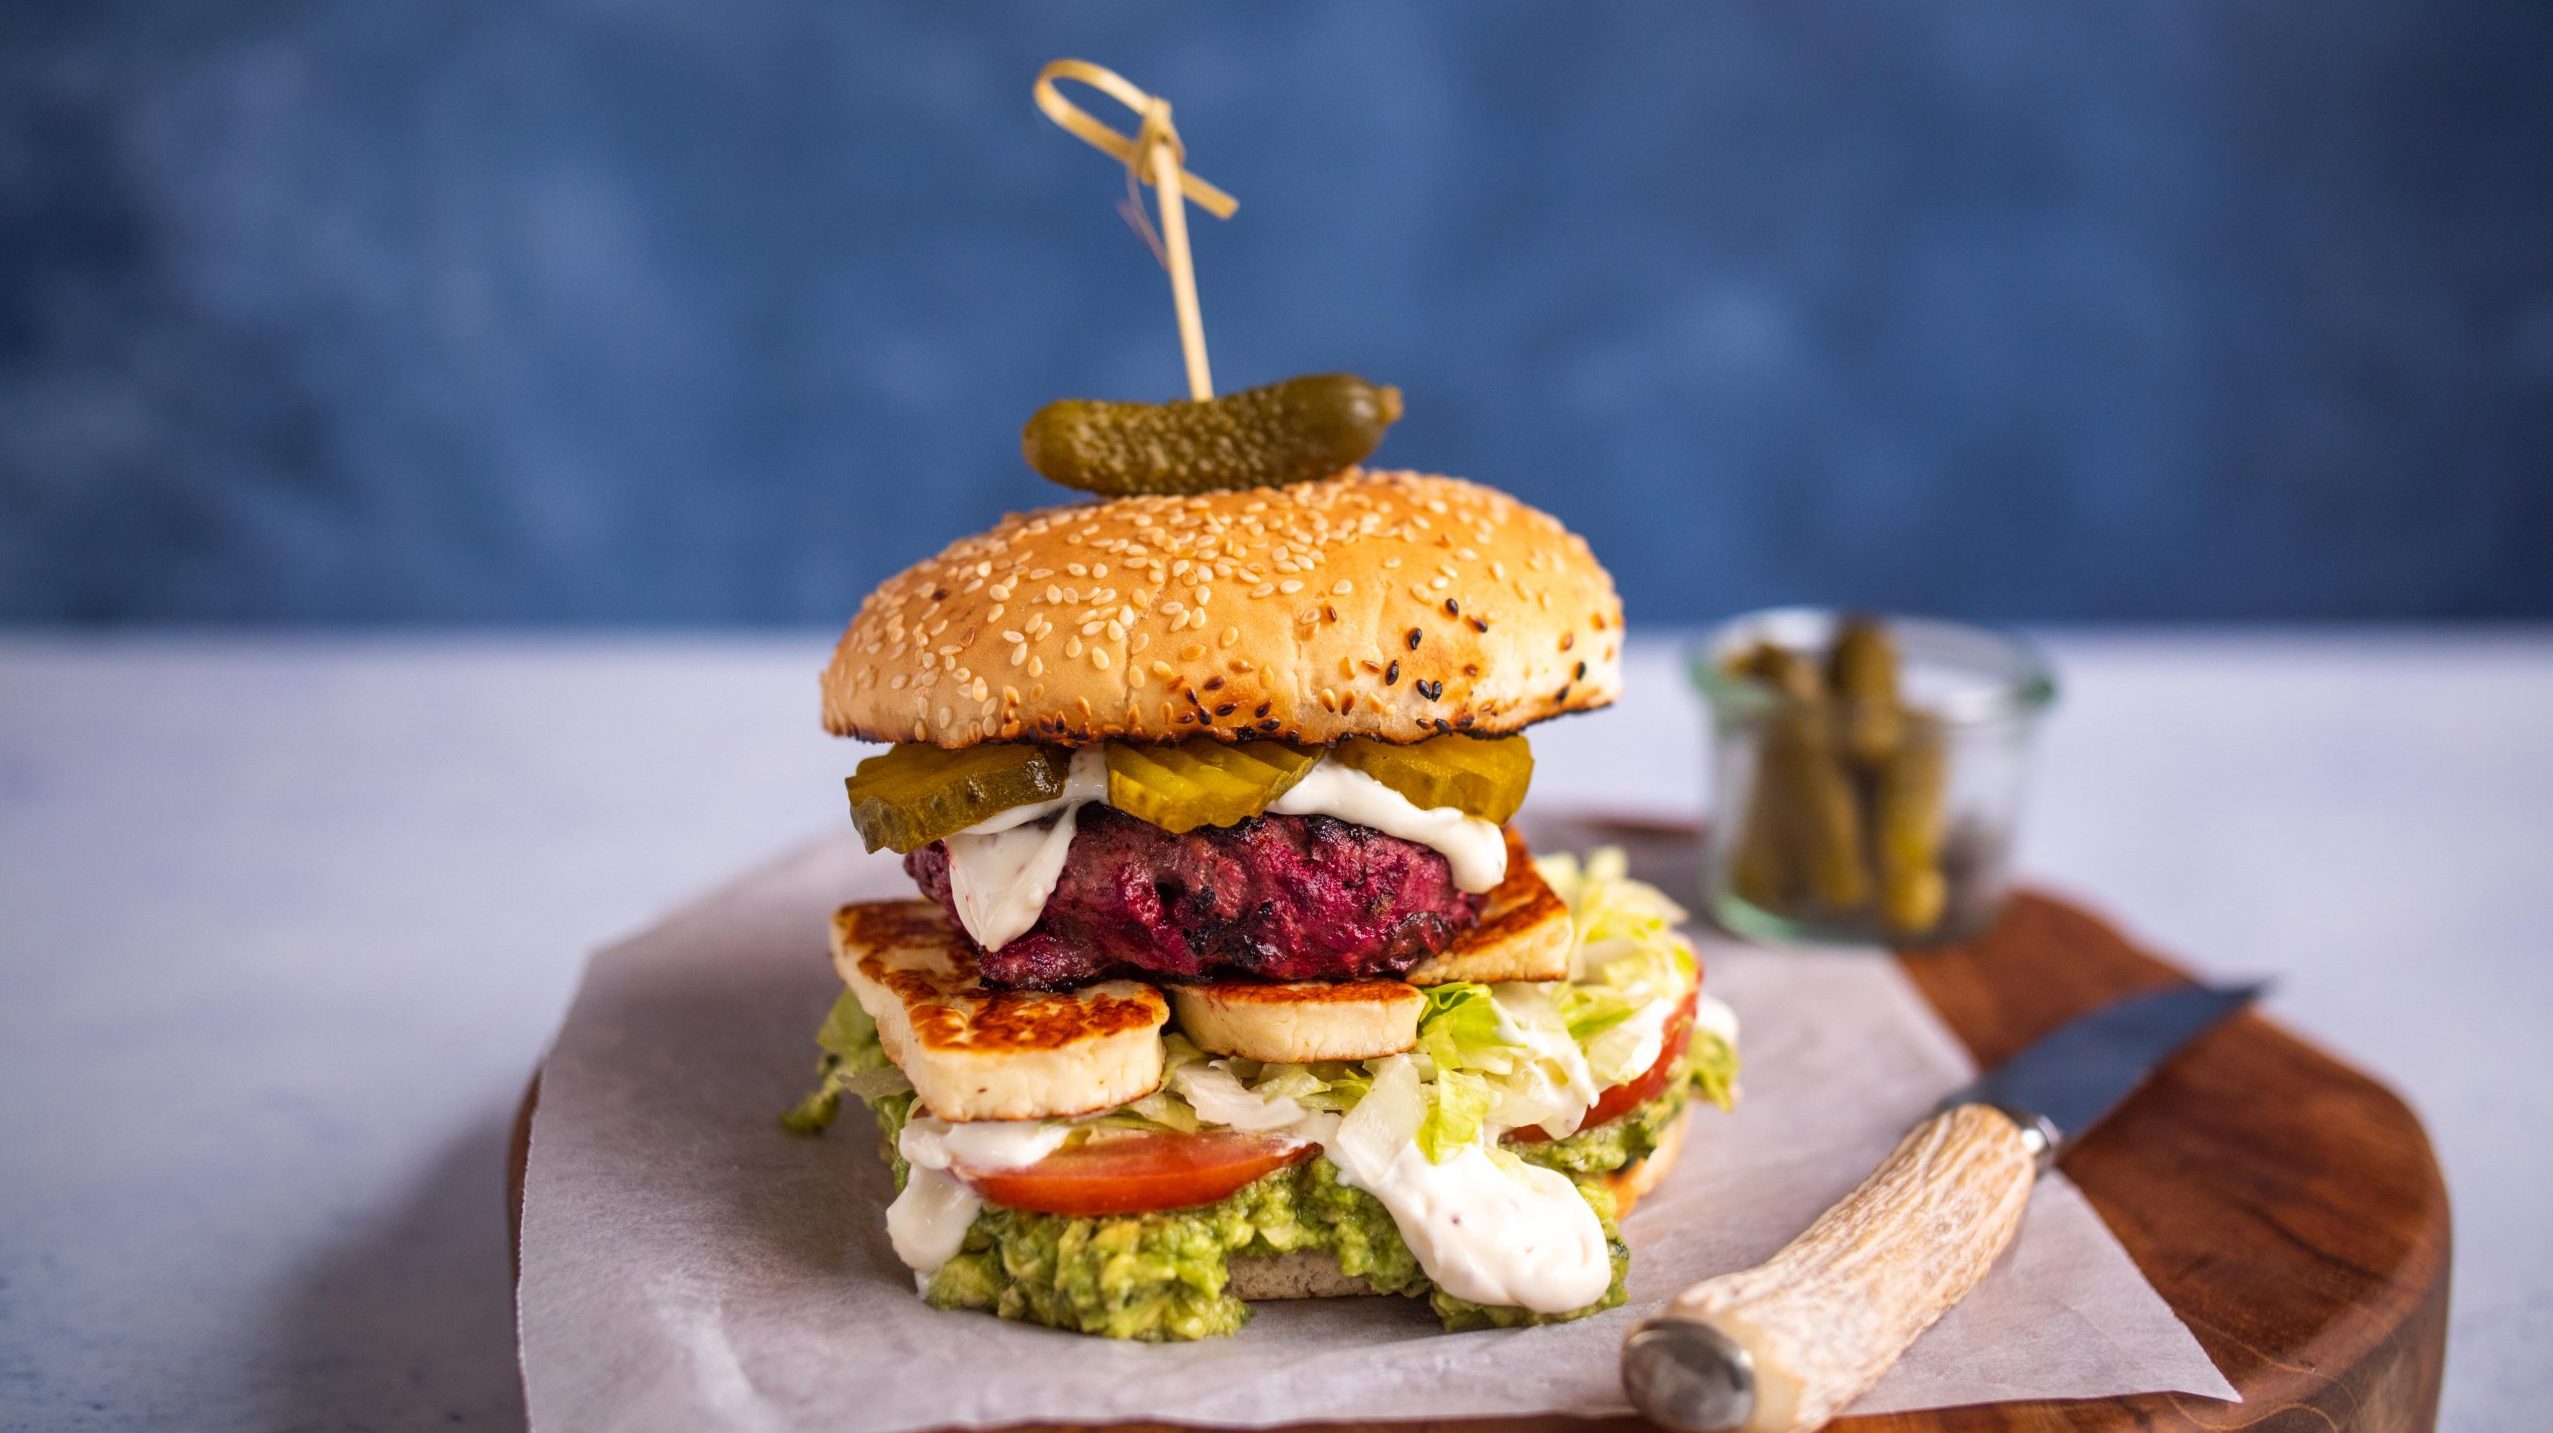 Beetroot burger generously garnished with avocado, mayo, halloumi cheese, tomatoes, lettuce and pickles placed a wooden cutting board.